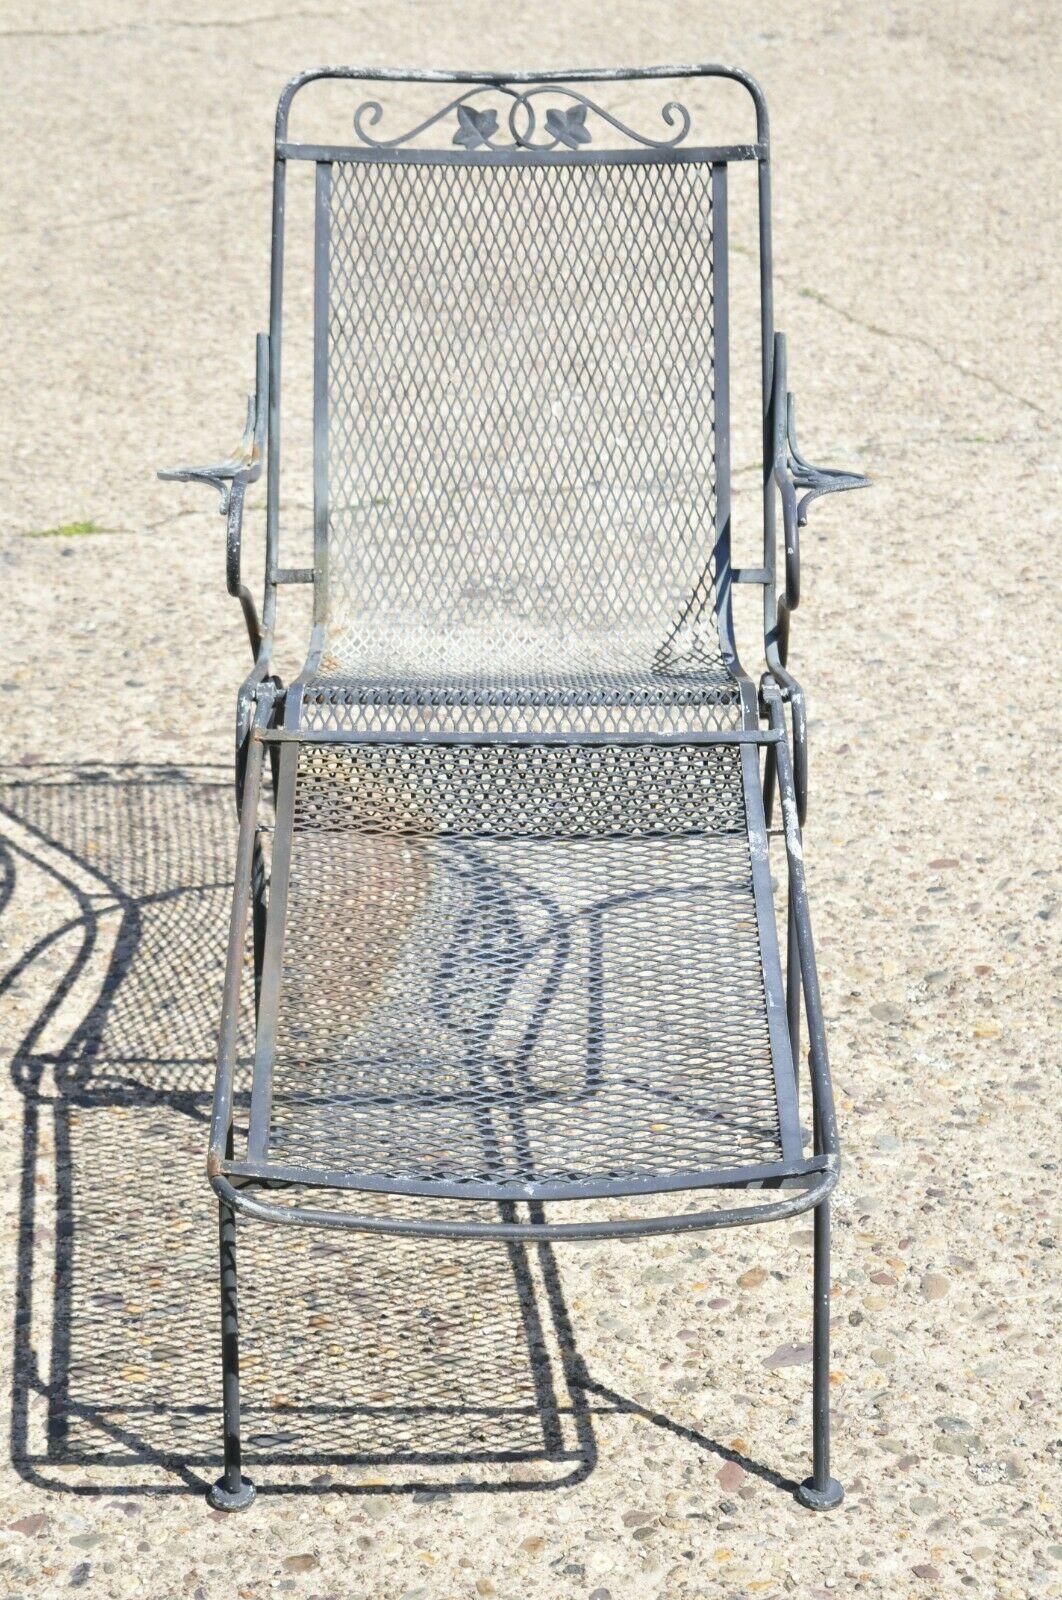 Vintage Woodard Wrought Iron Garden Patio Lounge Chair with Removable Ottoman. Item features wrought iron frame, removable footrest ottoman, perforated mesh seat and back, 2 part construction, very nice vintage set, quality American craftsmanship,